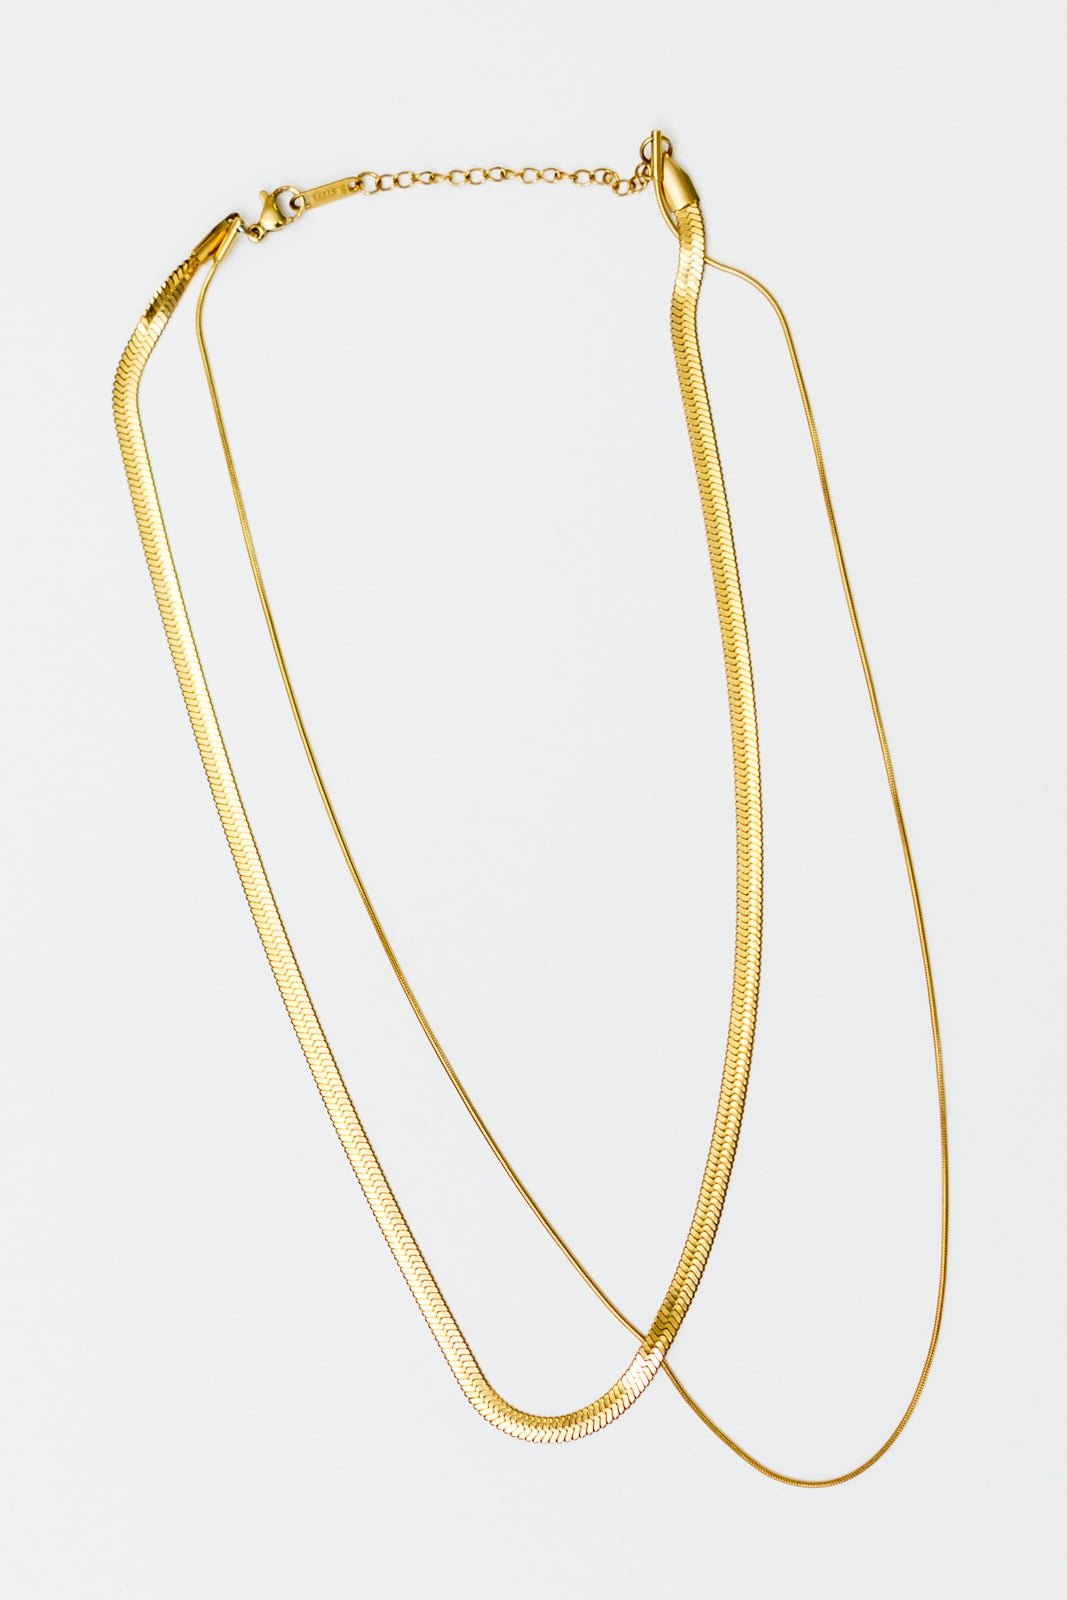 Noontide Double Chain Necklace - Happily Ever Atchison Shop Co.